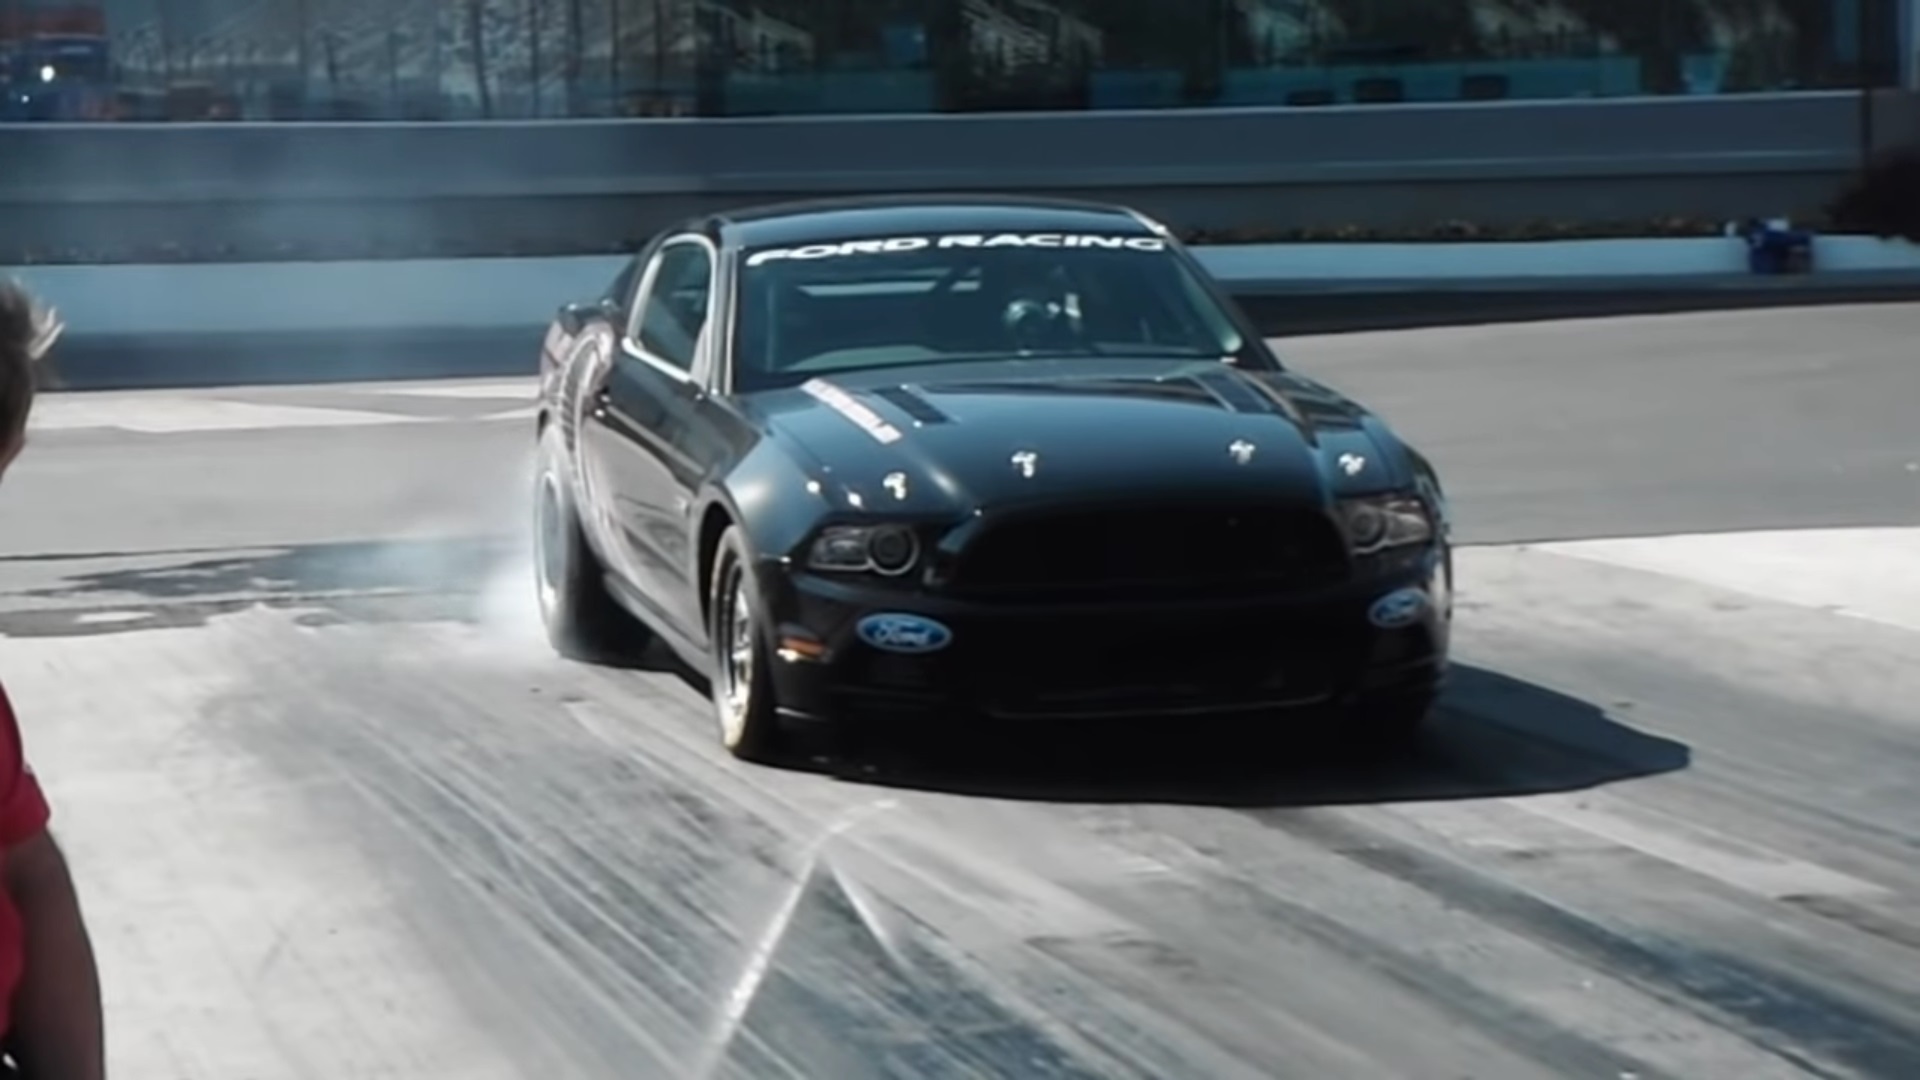 Video: 2013 Ford Mustang Super Cobra Jet - First Pass Off Showroom Floor !